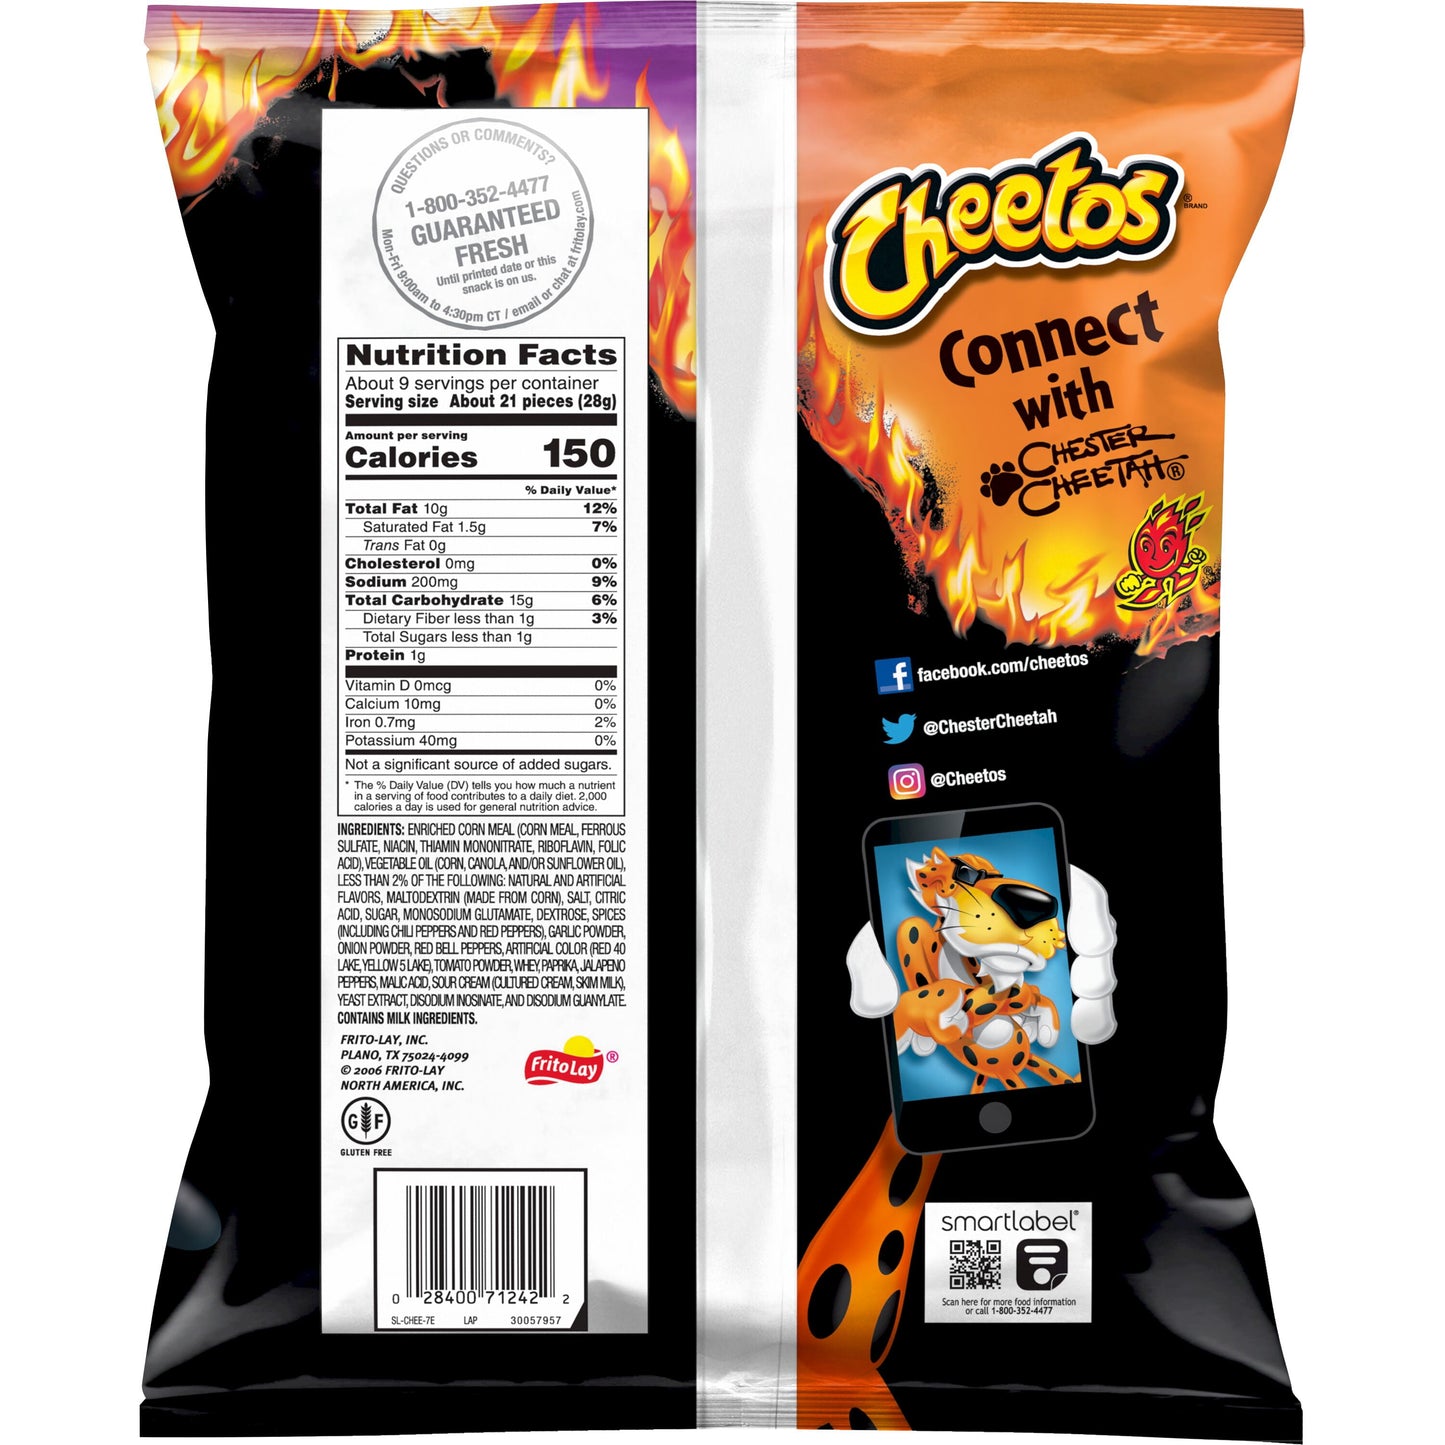 Flamin’ Hot Tangy Chili Fusion Flavored Snack, 8.5 Oz (Packaging May Vary)